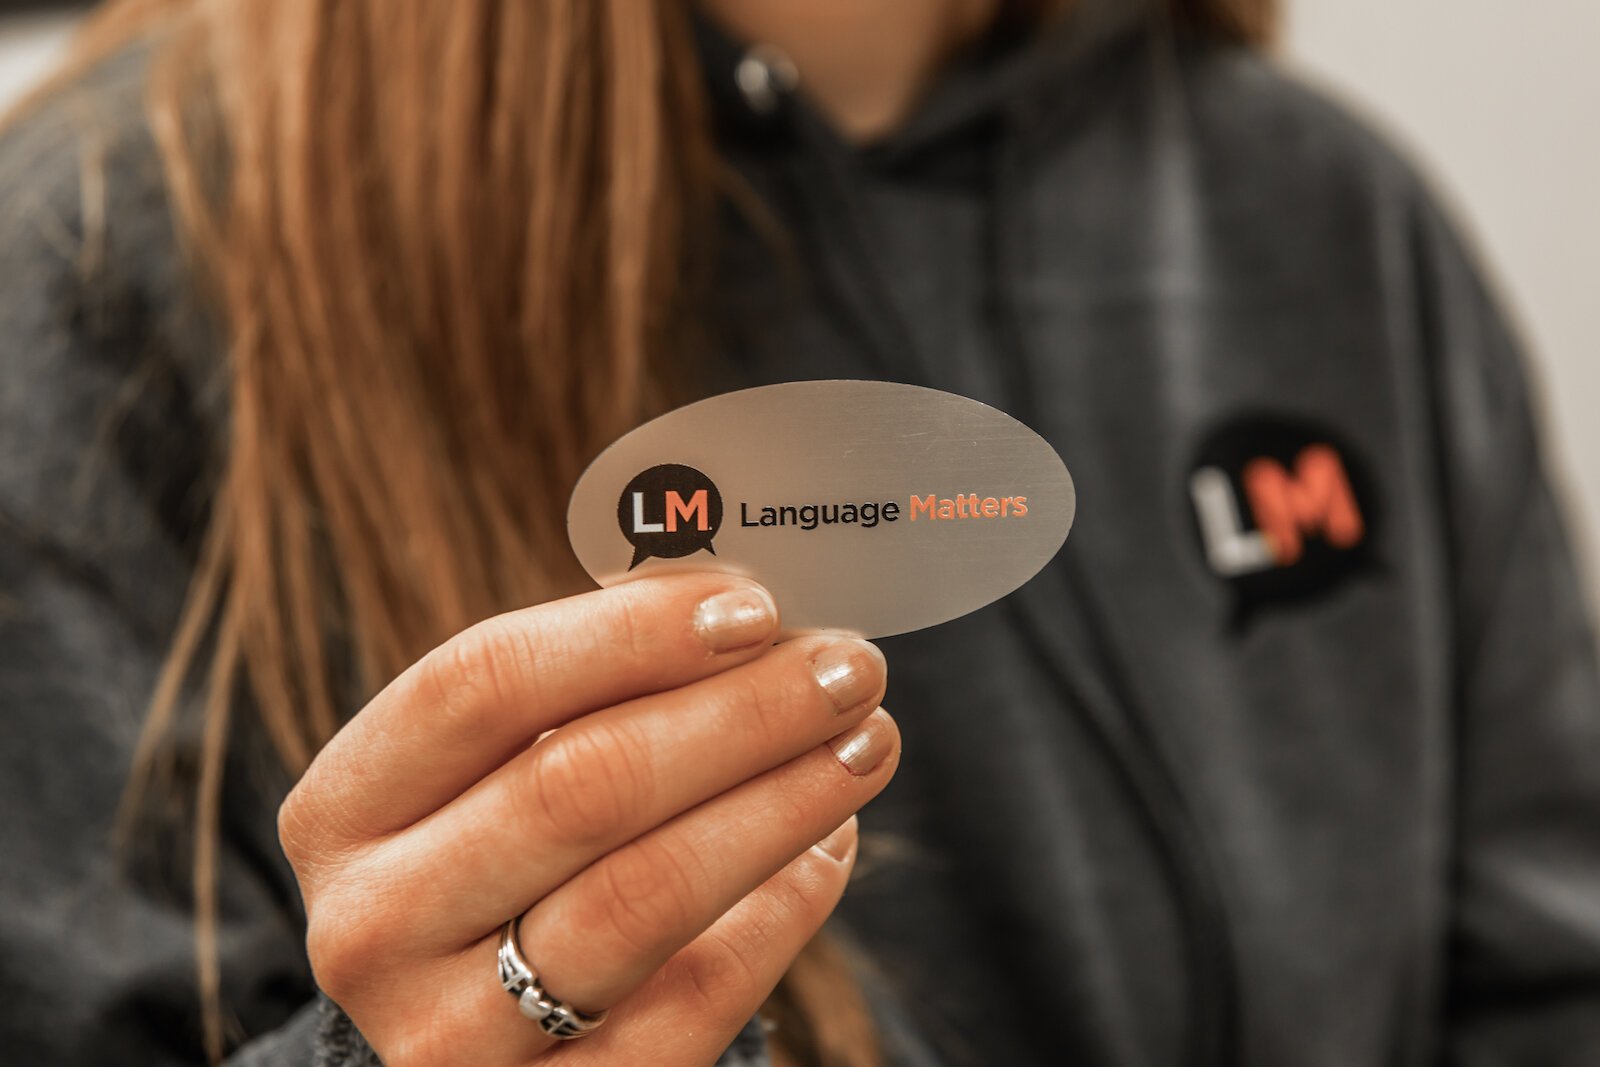 Language Matters teaches English, French, and Spanish to schools, individuals, and organizations.